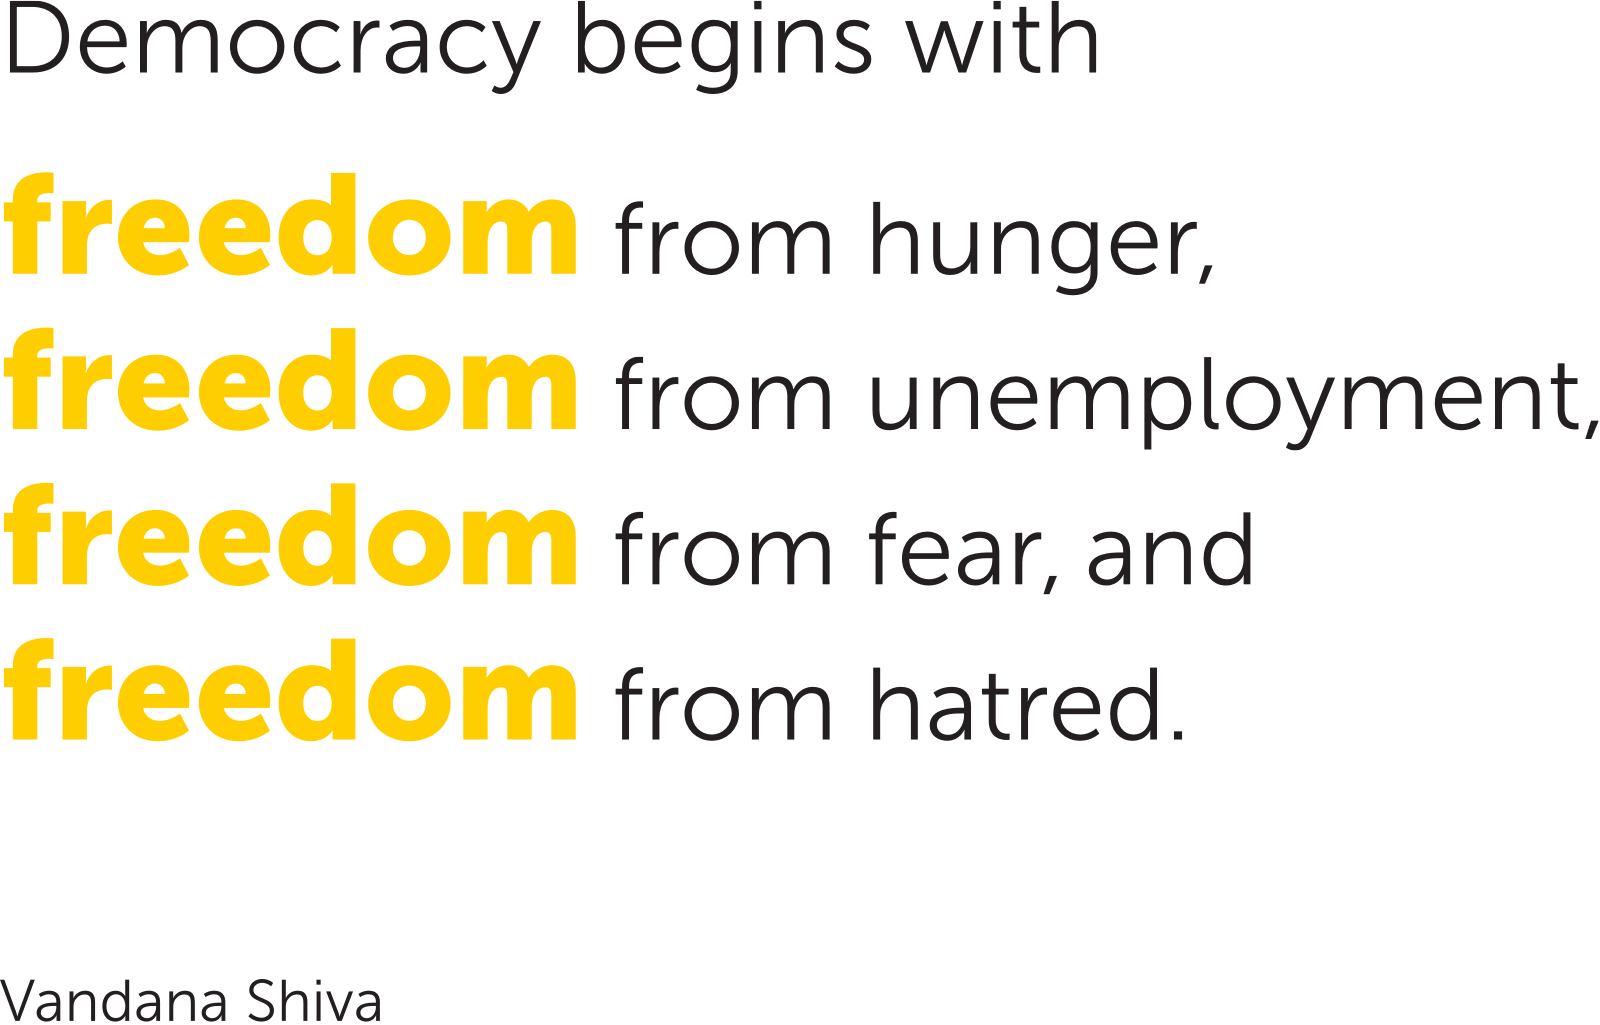 Vandana Shiva: Democracy begins with freedom from hunger, freedom from unemployment, freedom from fear, and freedom from hatred.